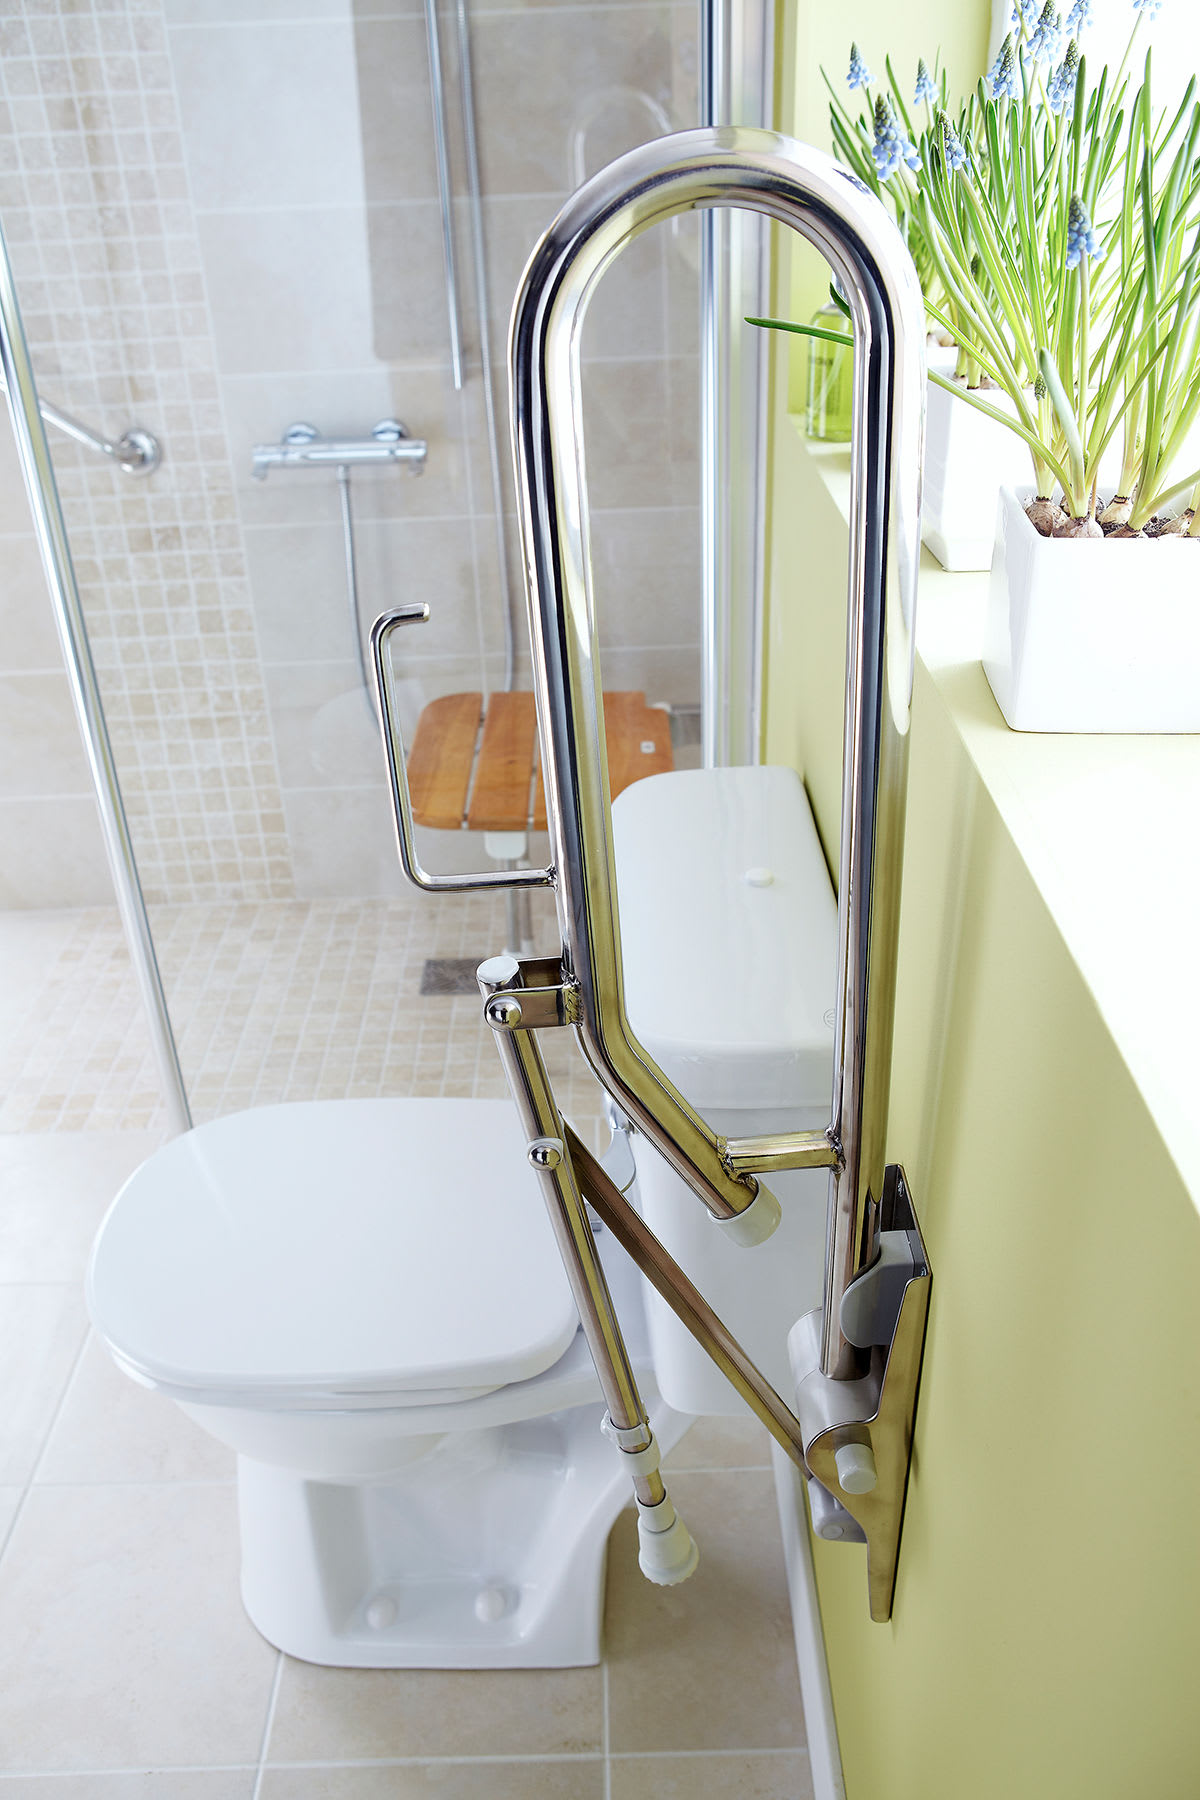 When planning a bathroom remodel for a senior, installing grab bars in key areas is a good idea.